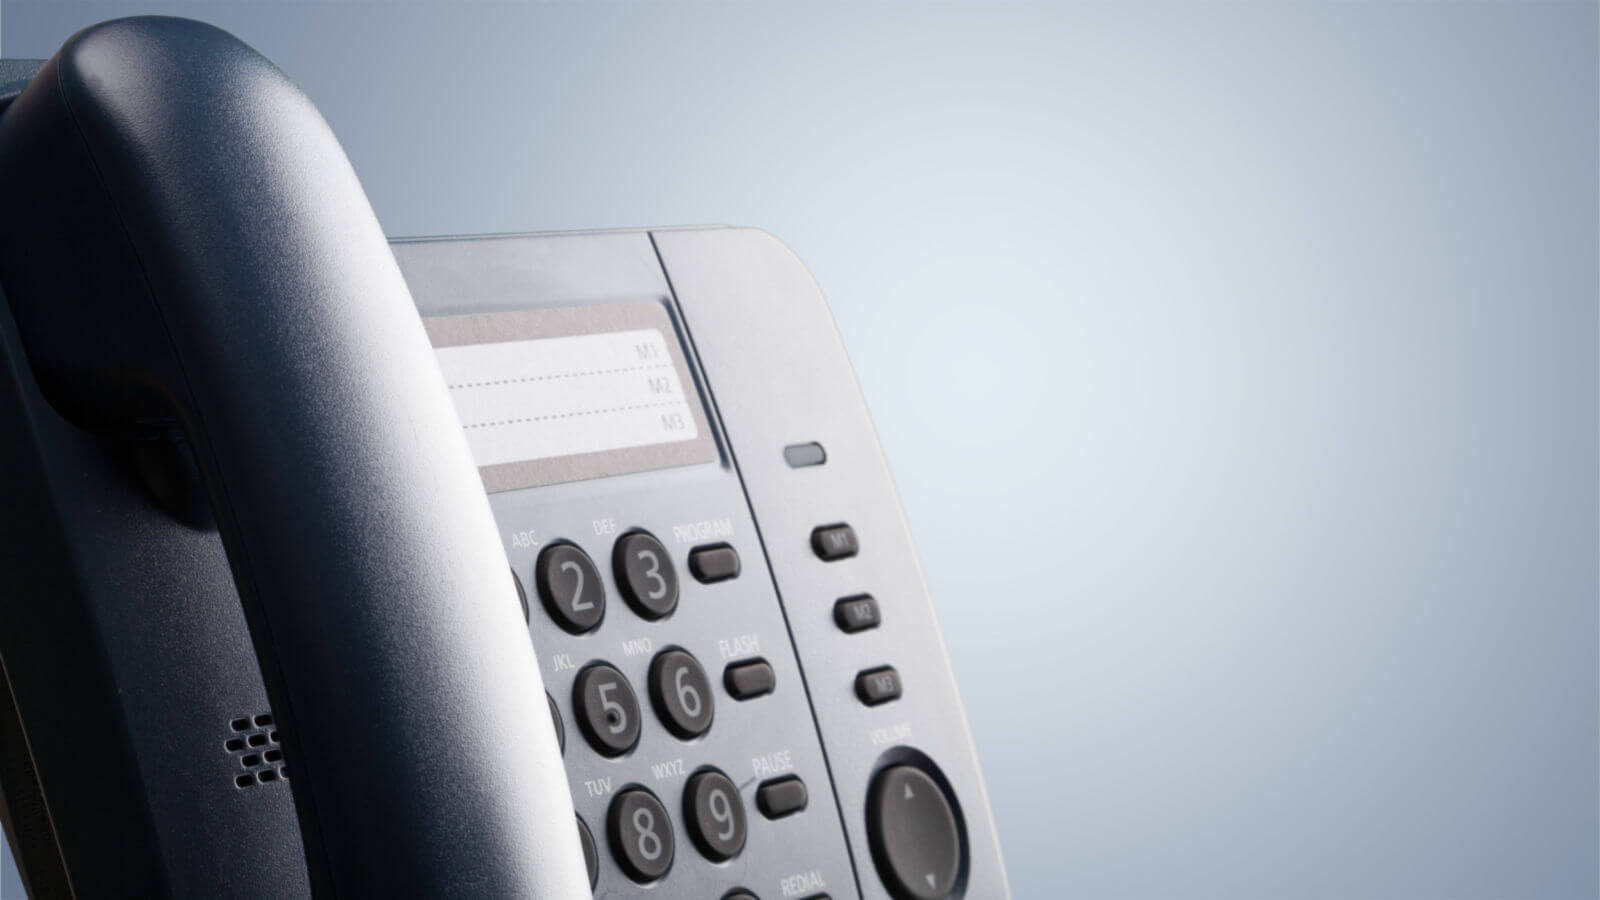 The Ultimate Guide to VoIP: Advantages, Disadvantages, and Best Practices